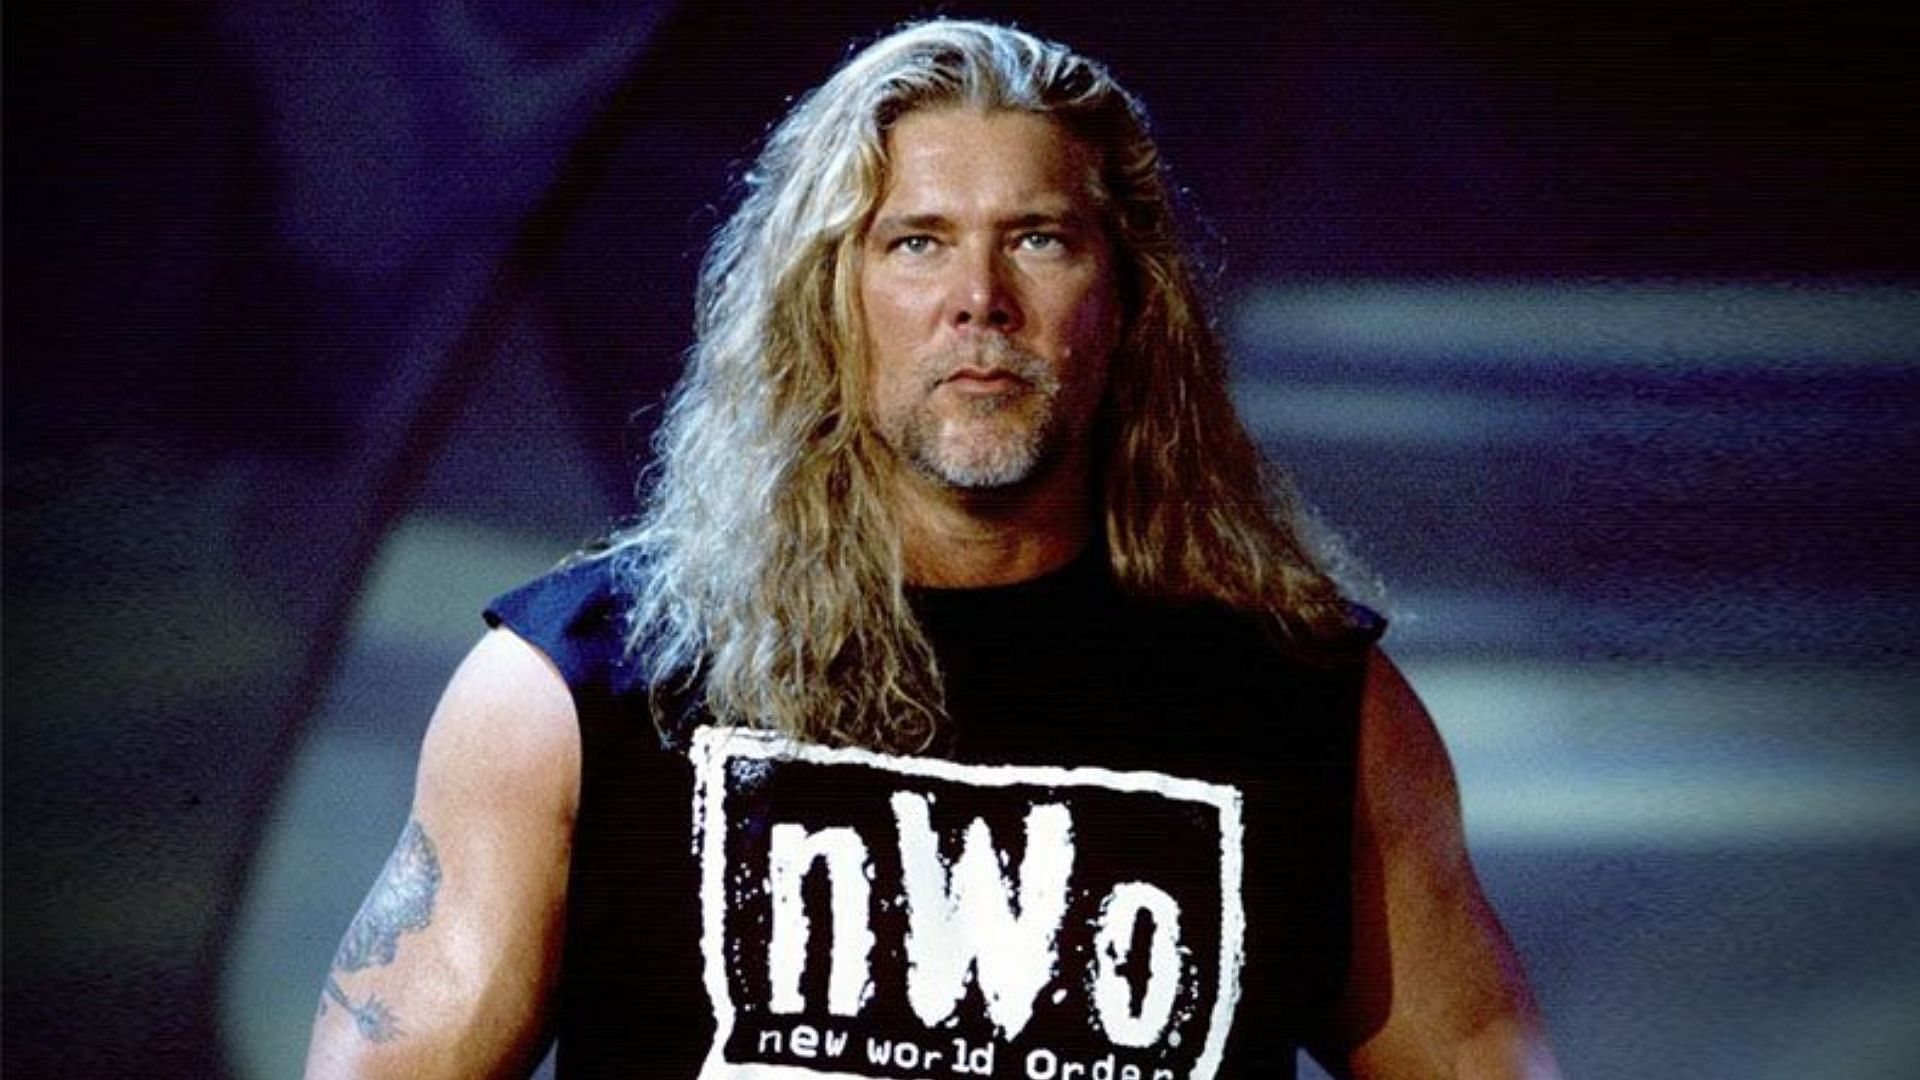 Kevin Nash on trying to recruit a WWE legend to the nWo